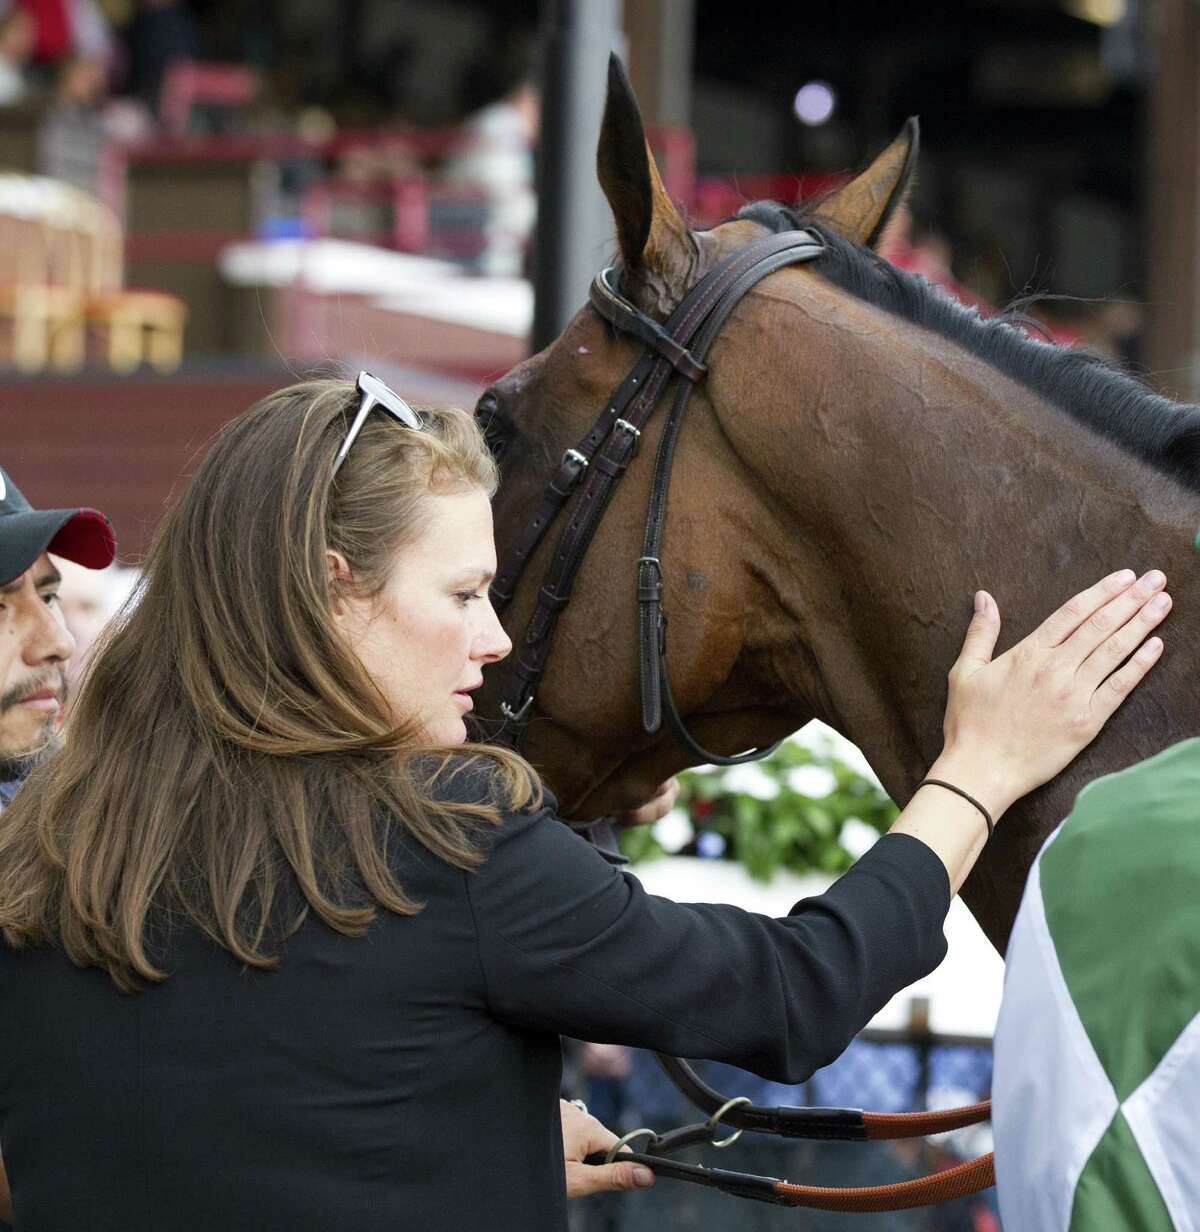 Elizabeth Voss is in the Saratoga winner's circle after Makari, whom Voss trains, won the A.P. Smithwick Memorial Steeplechase Stakes on July 31, 2014, at Saratoga. (Barbara D. Livingston)